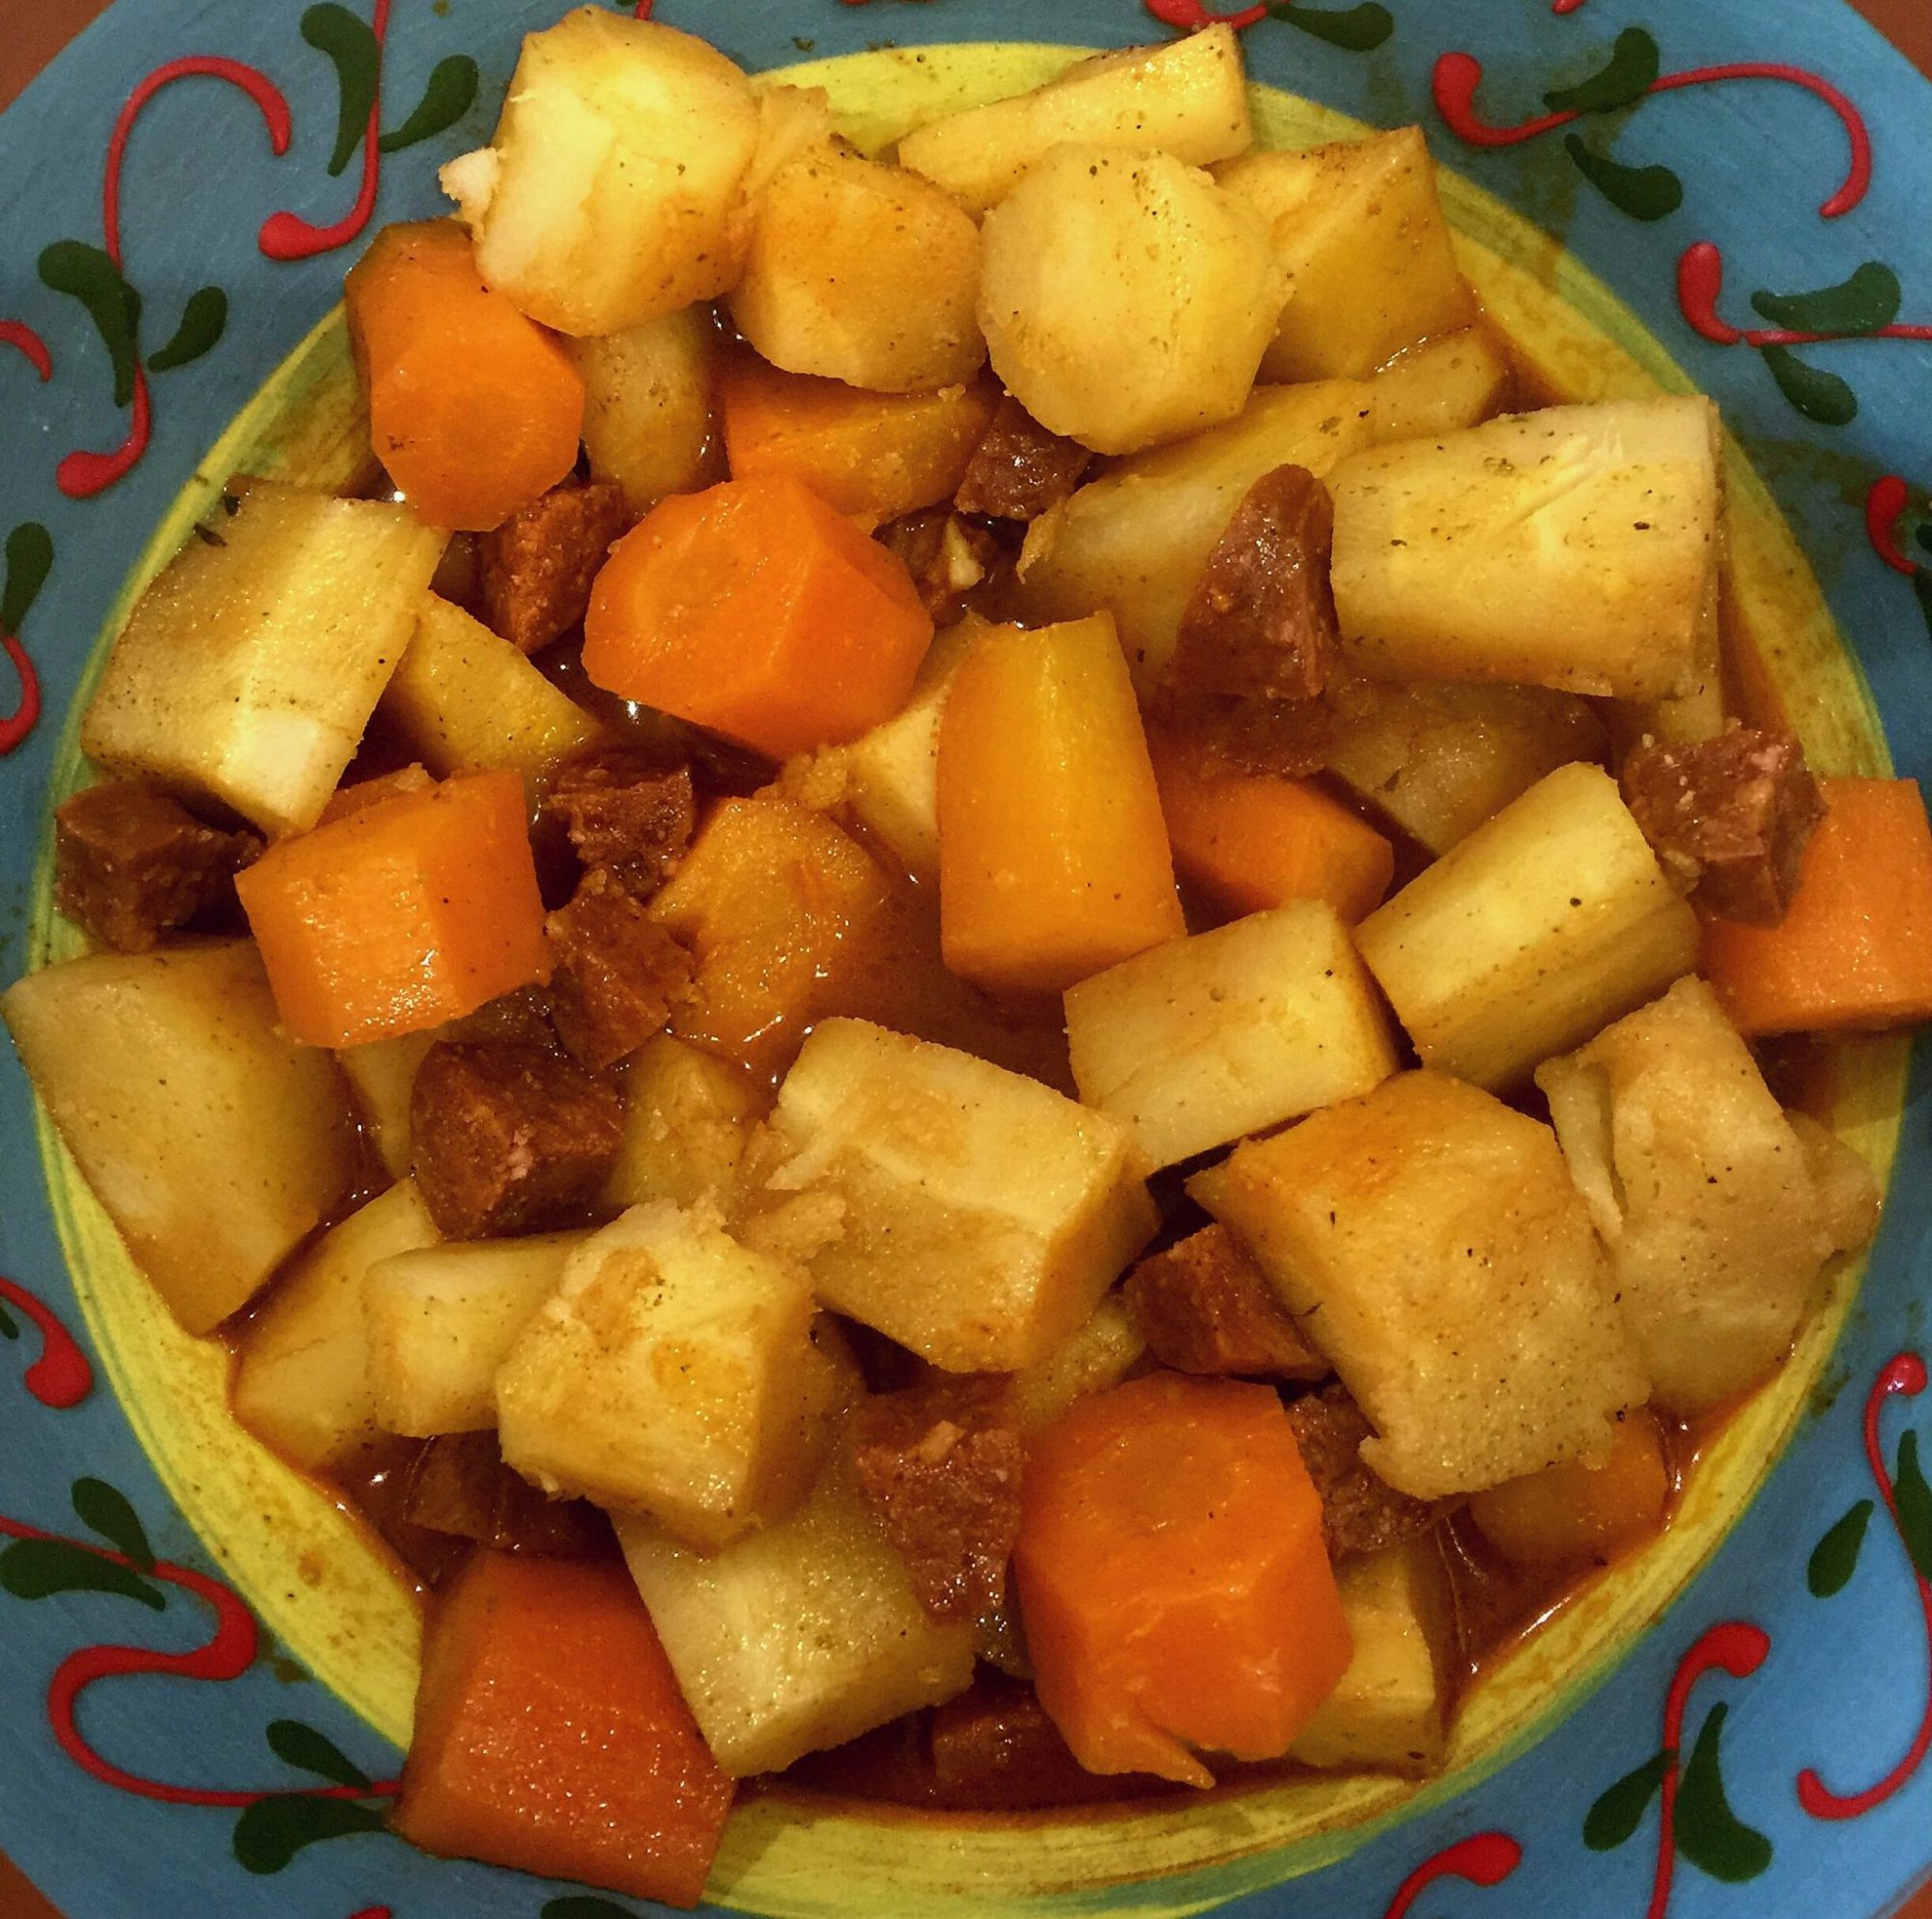 Parsnips and carrots with sausages (chorizo)